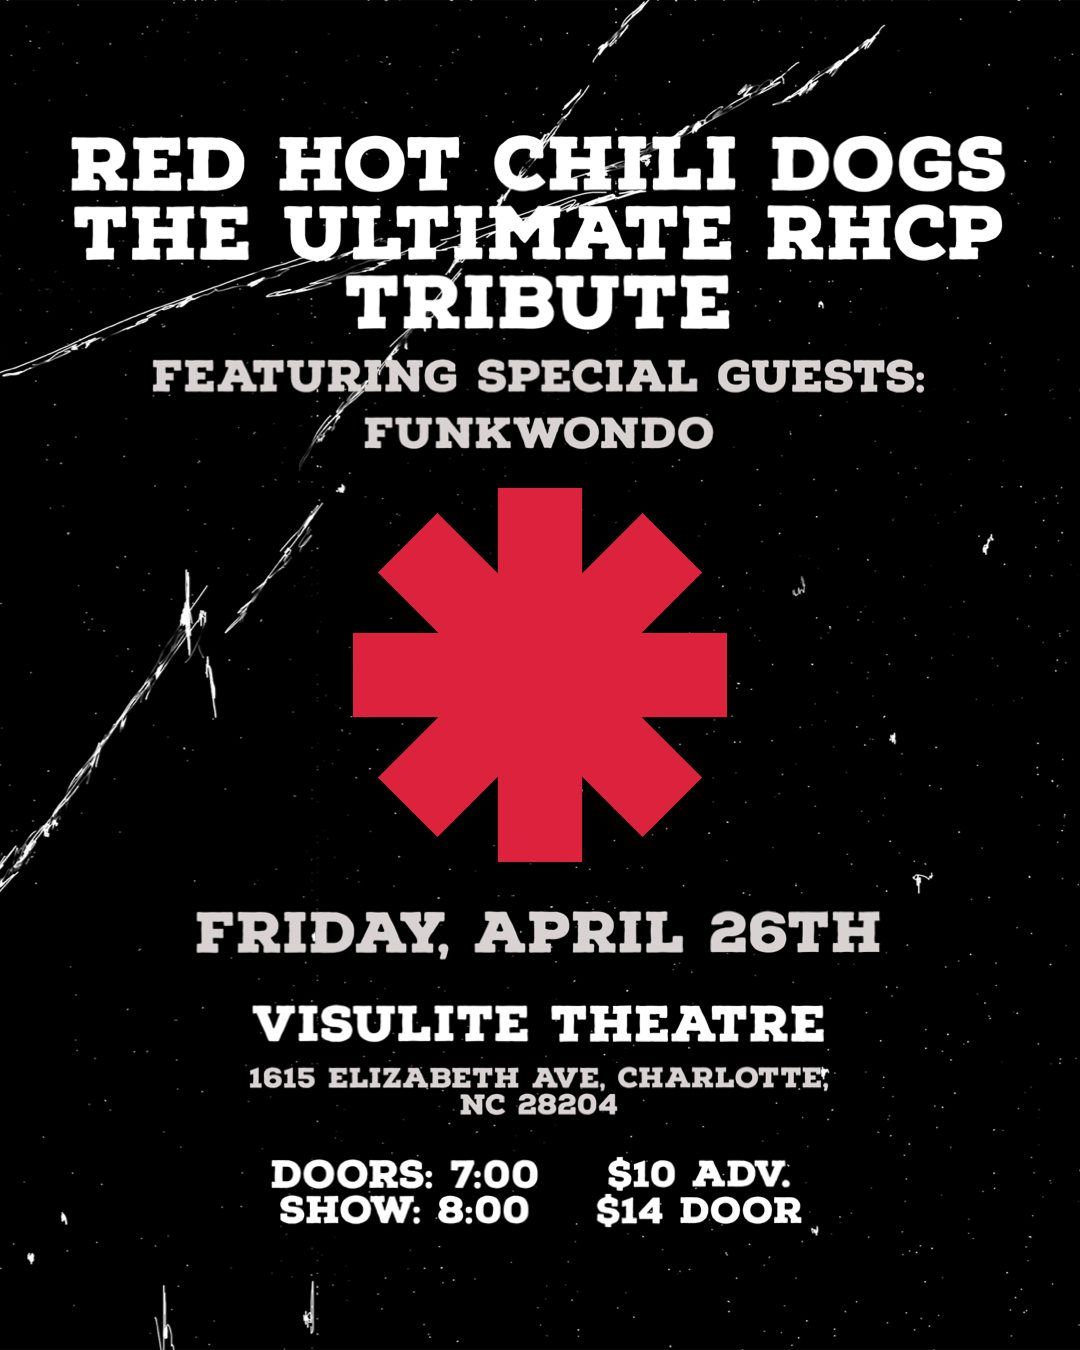 Red Hot Chili Dogs - The Ultimate RHCP Tribute w\/ Funkwondo in Charlotte, NC